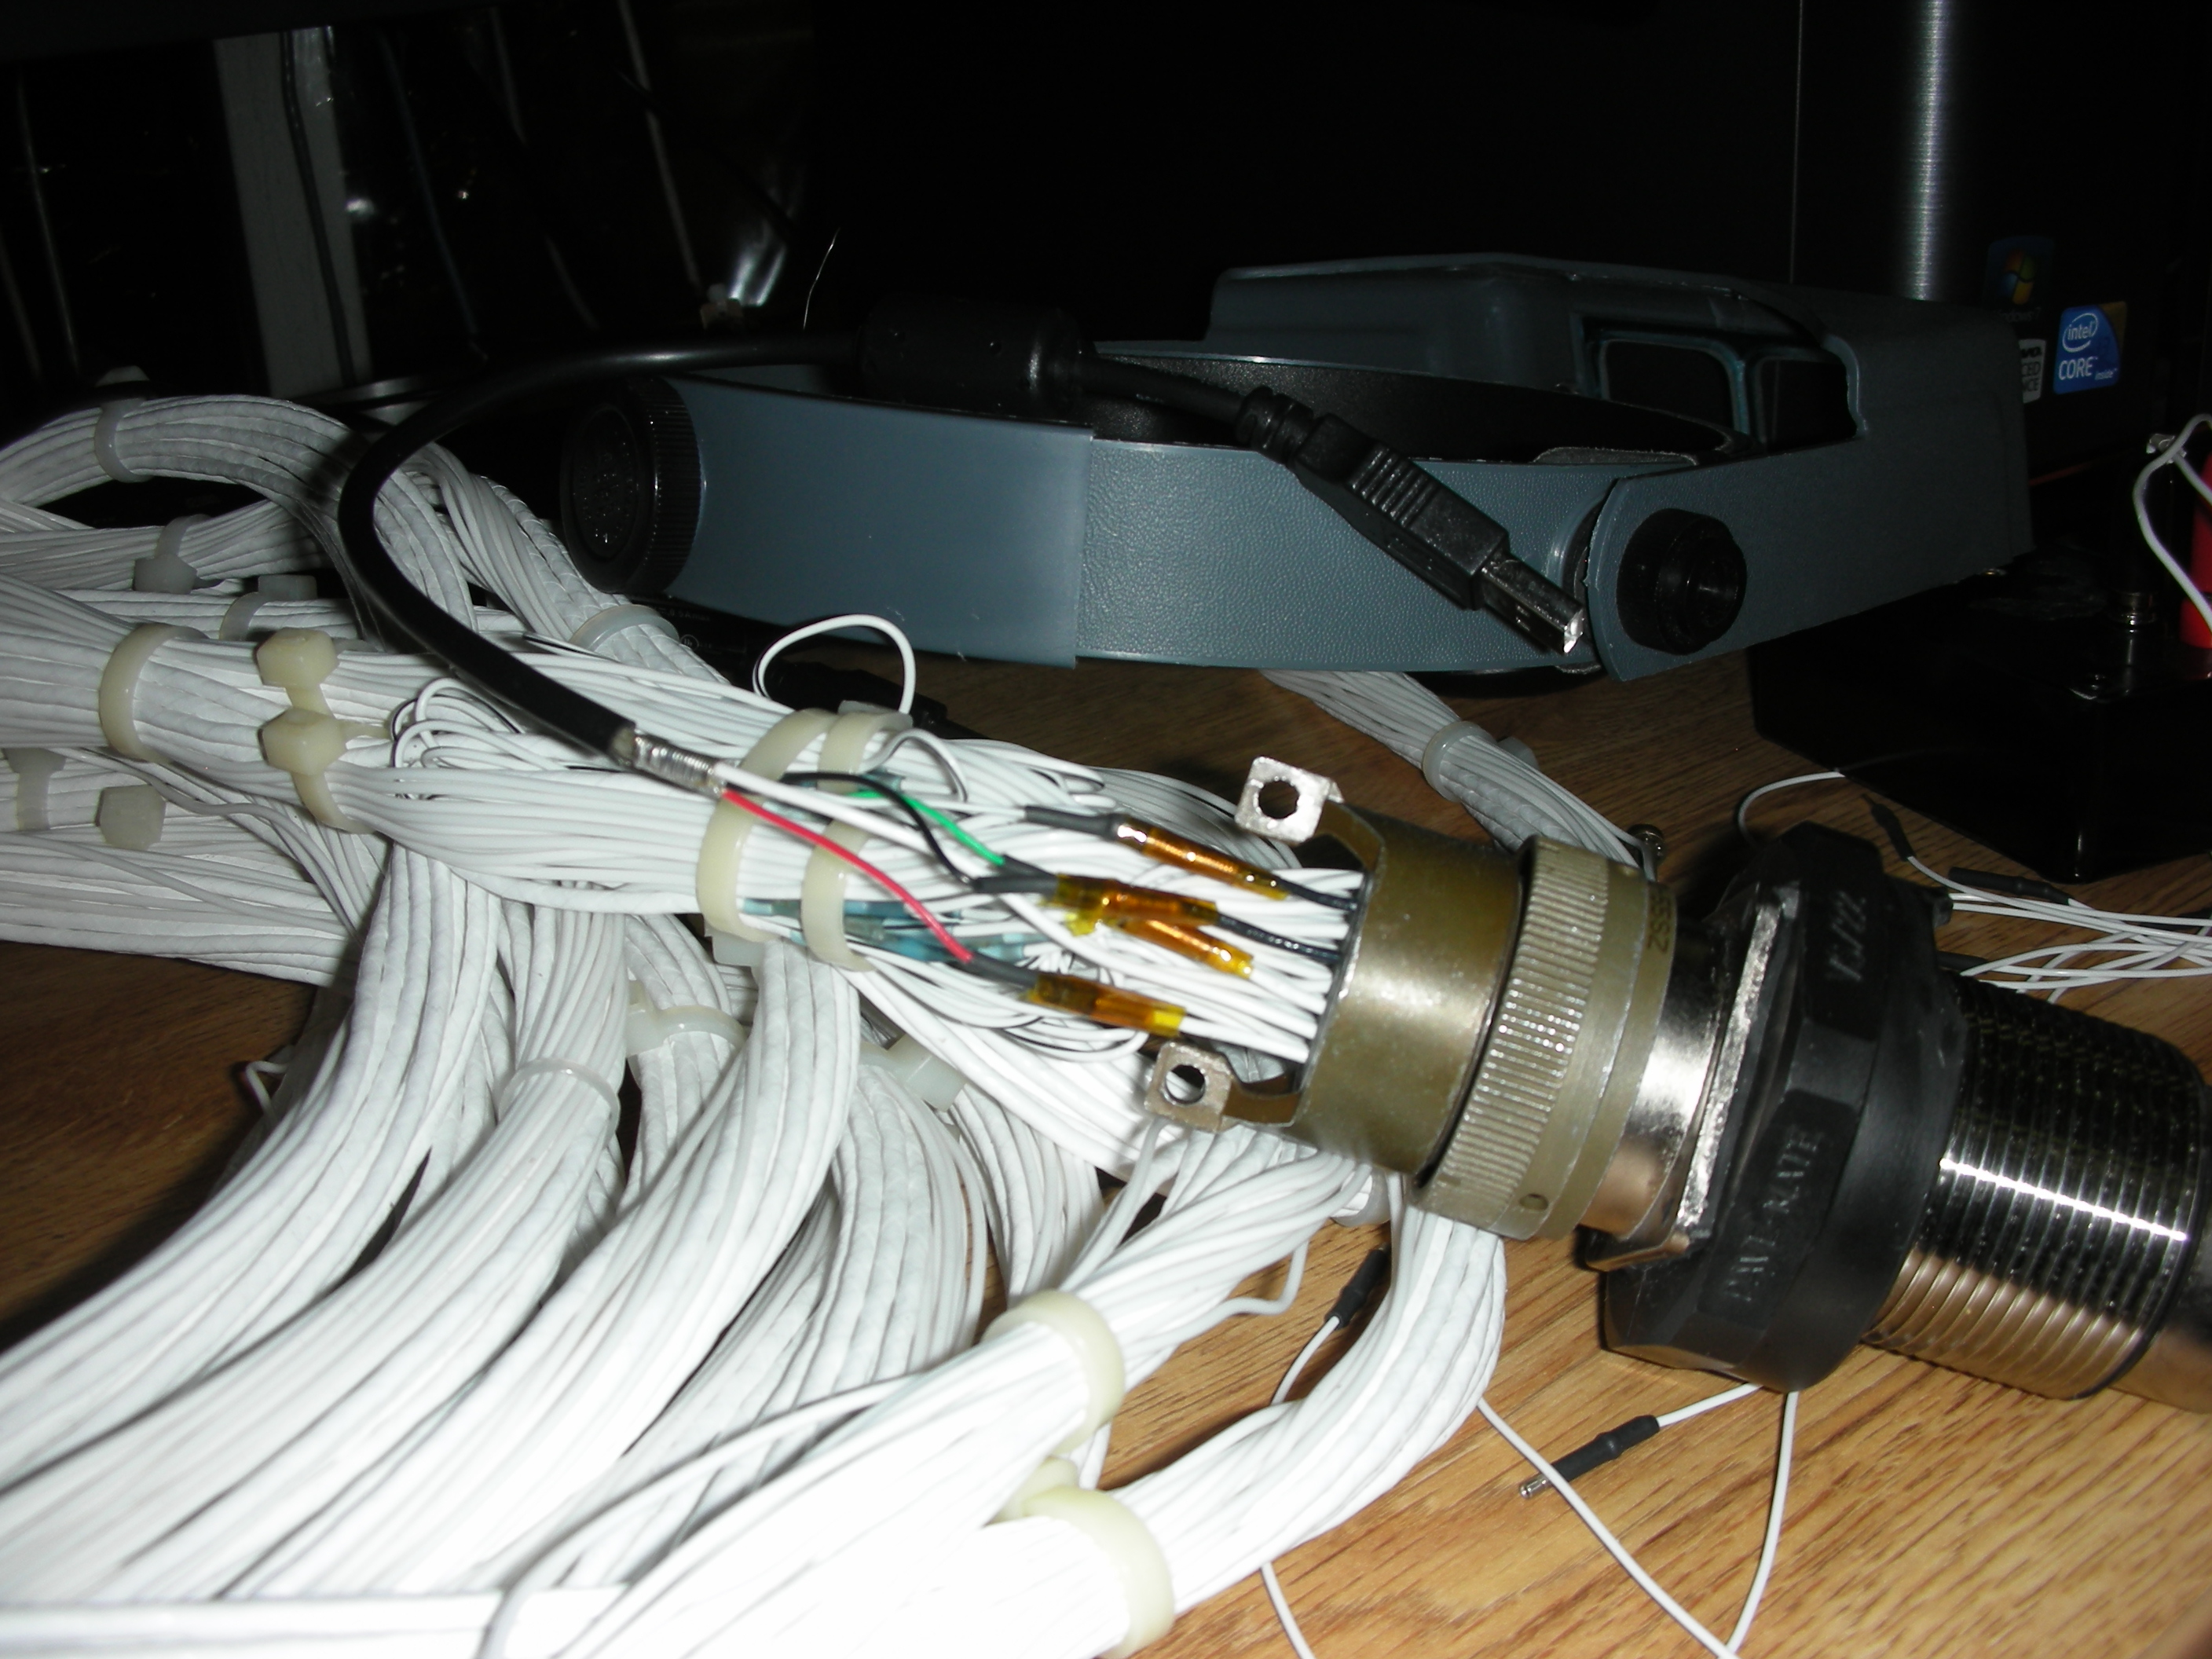 The cable for the webcam.